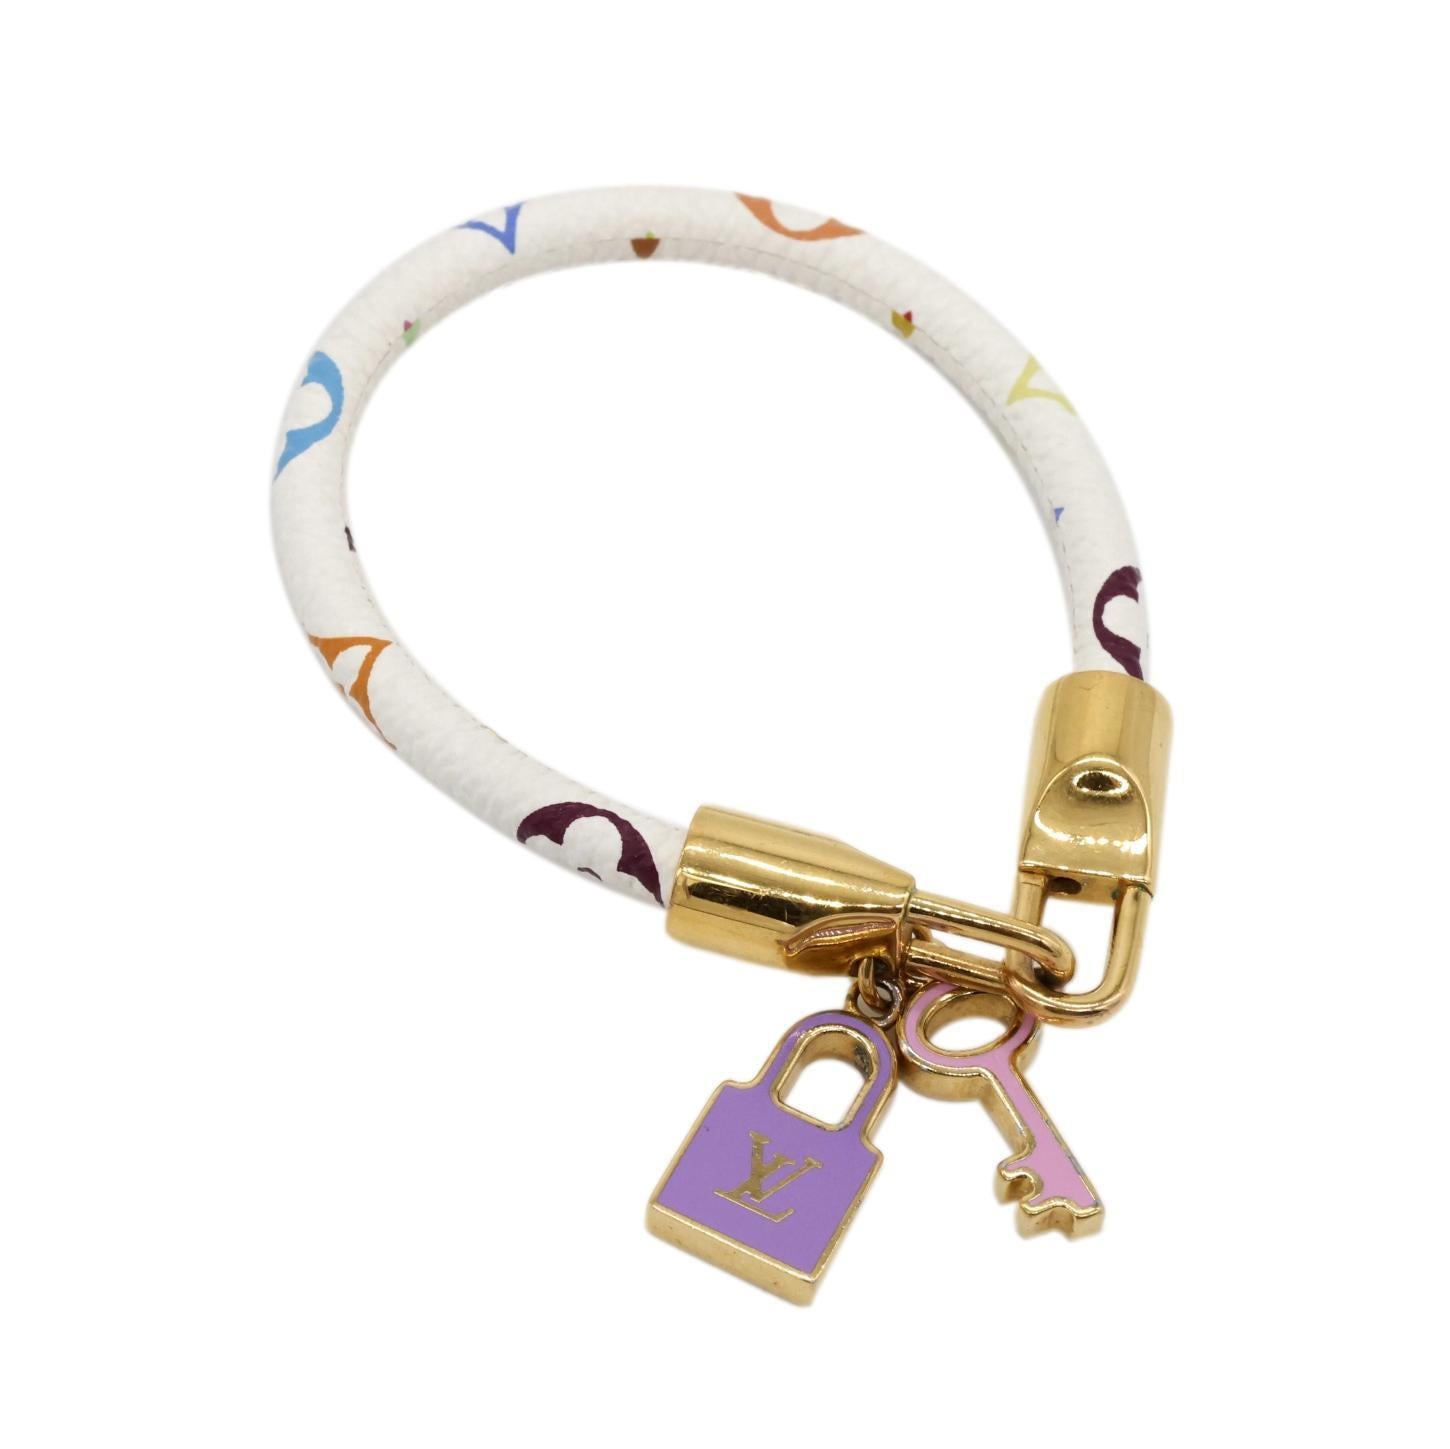 Louis Vuitton X Takashi Murakami Limited Edition Luck It Bracelet, 2003. This highly sought after piece of Louis Vuitton history became a worldwide phenomenon when Japanese artist Takashi Murakami teamed up with the Louis Vuitton brand and creative